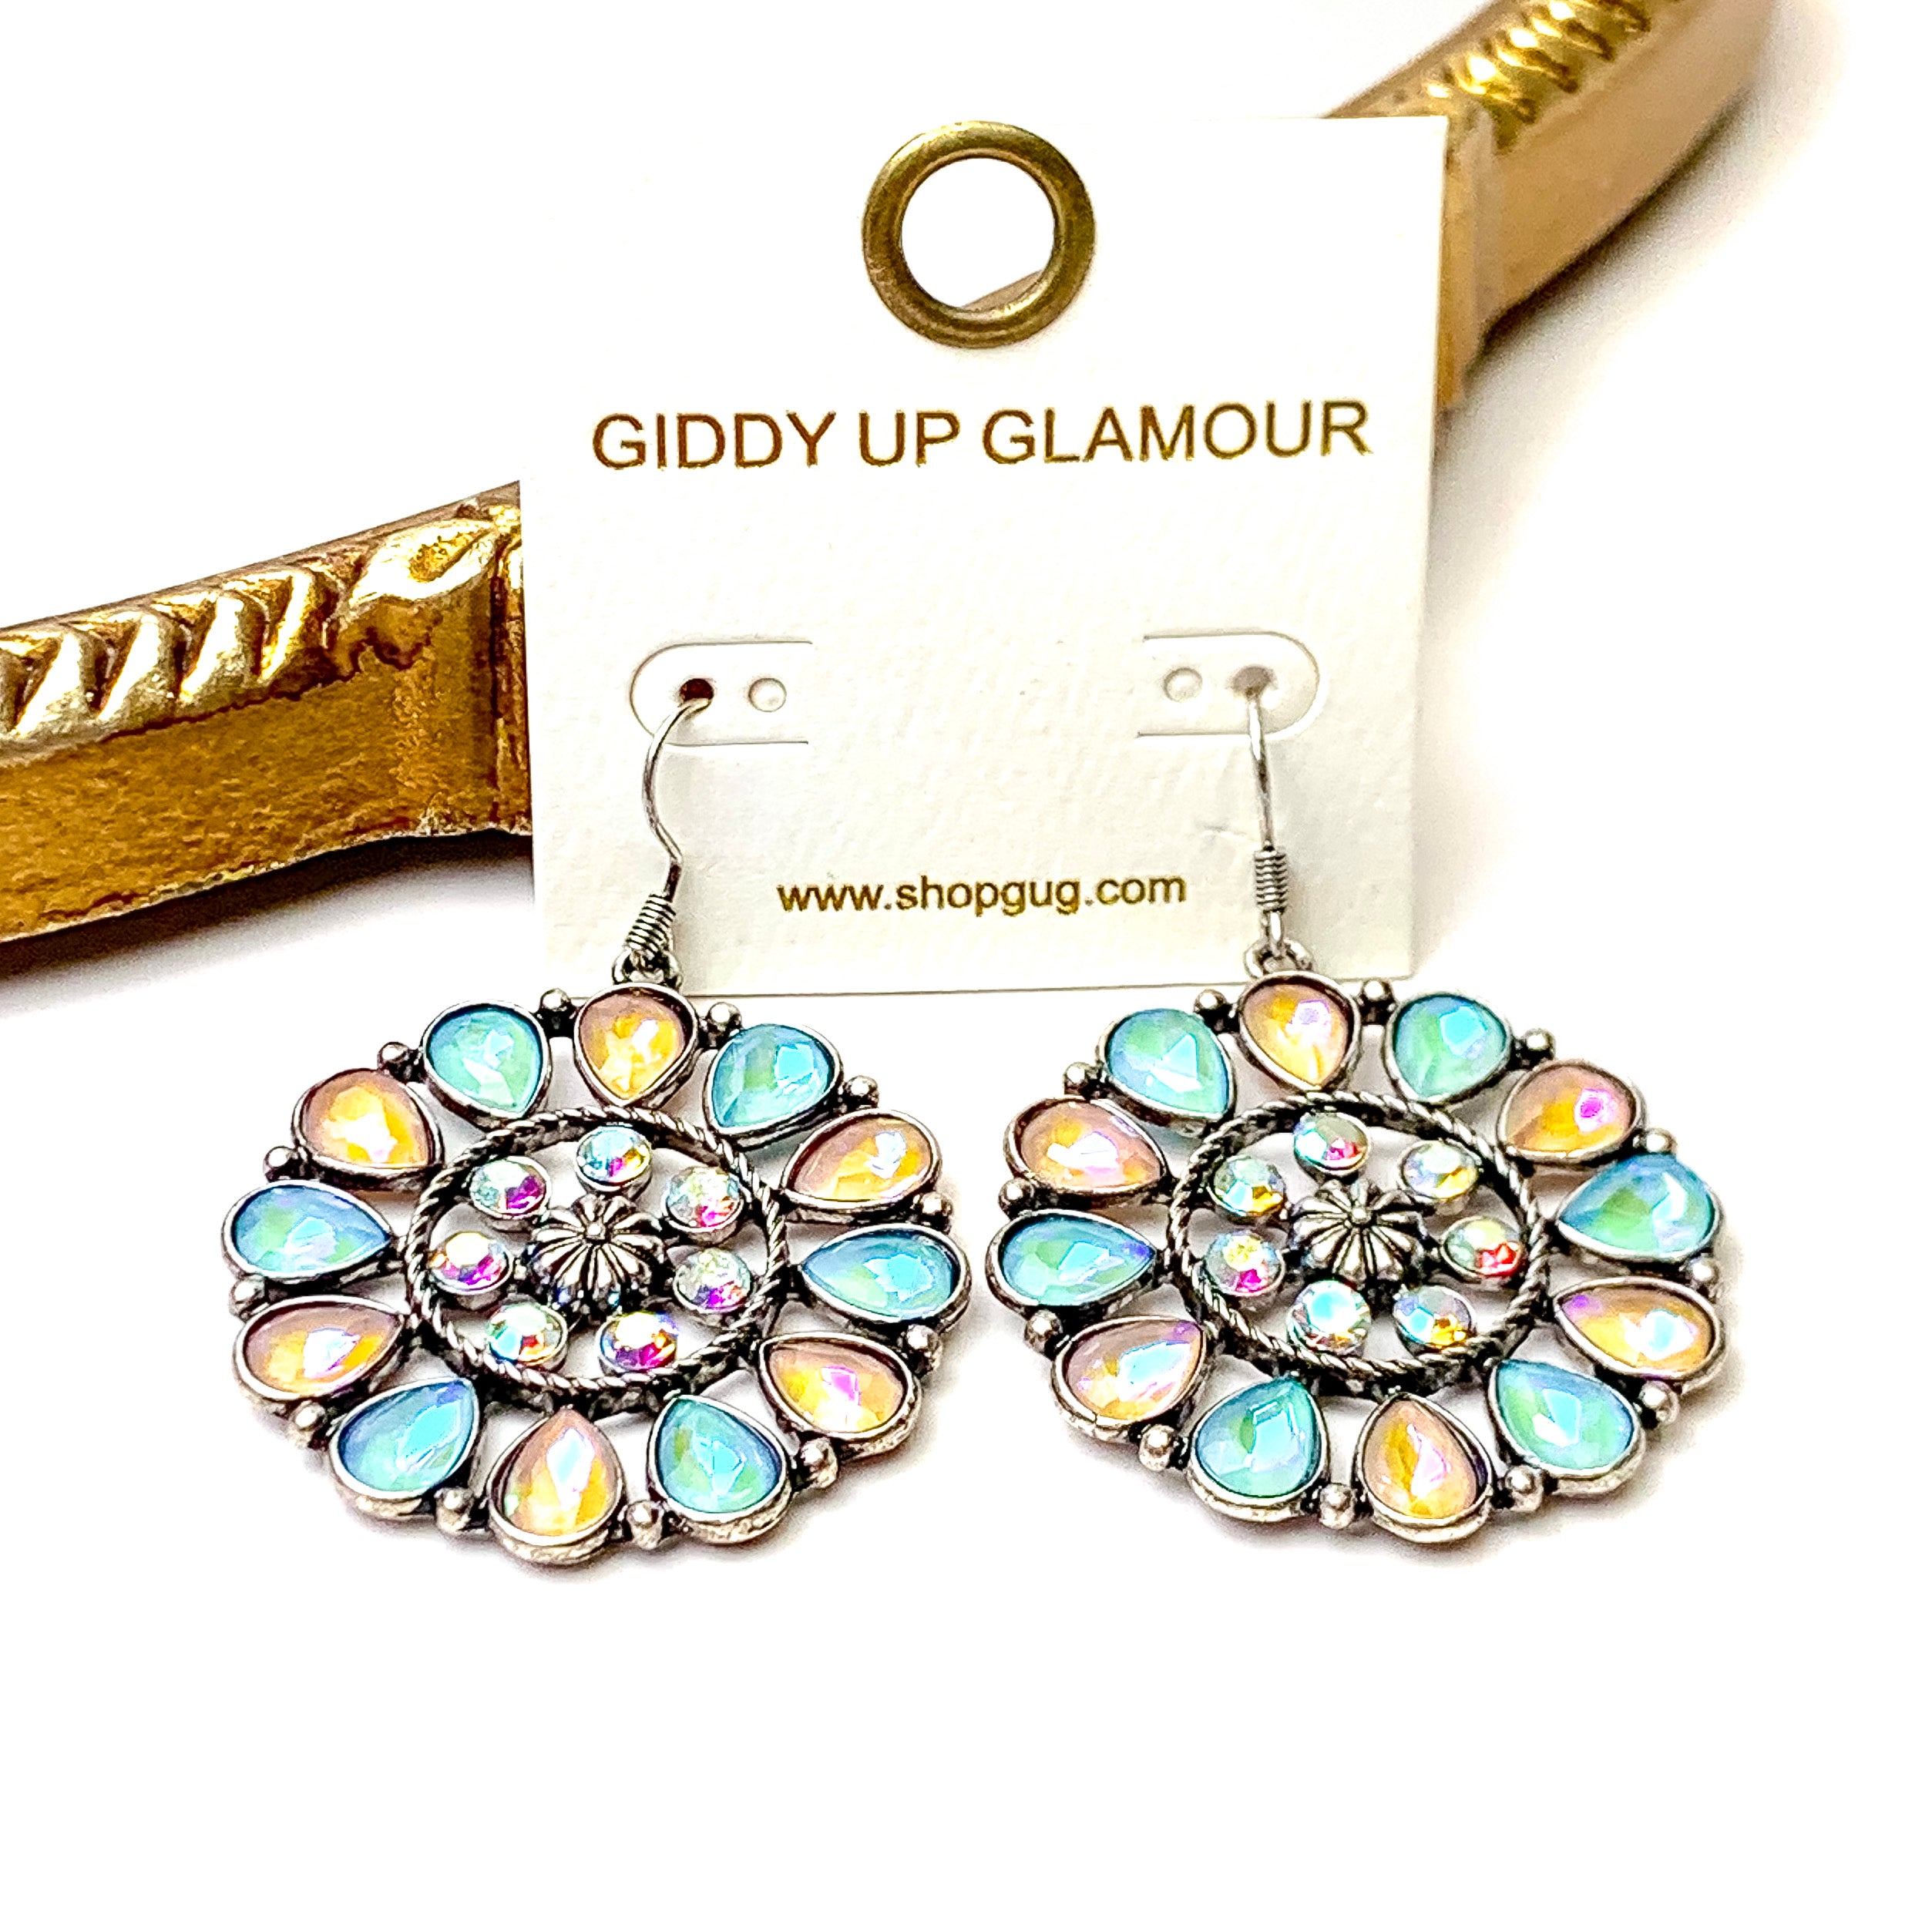 Desert Daisy Silver Tone Flower Concho Drop Earrings in Light Pink and Turquoise - Giddy Up Glamour Boutique